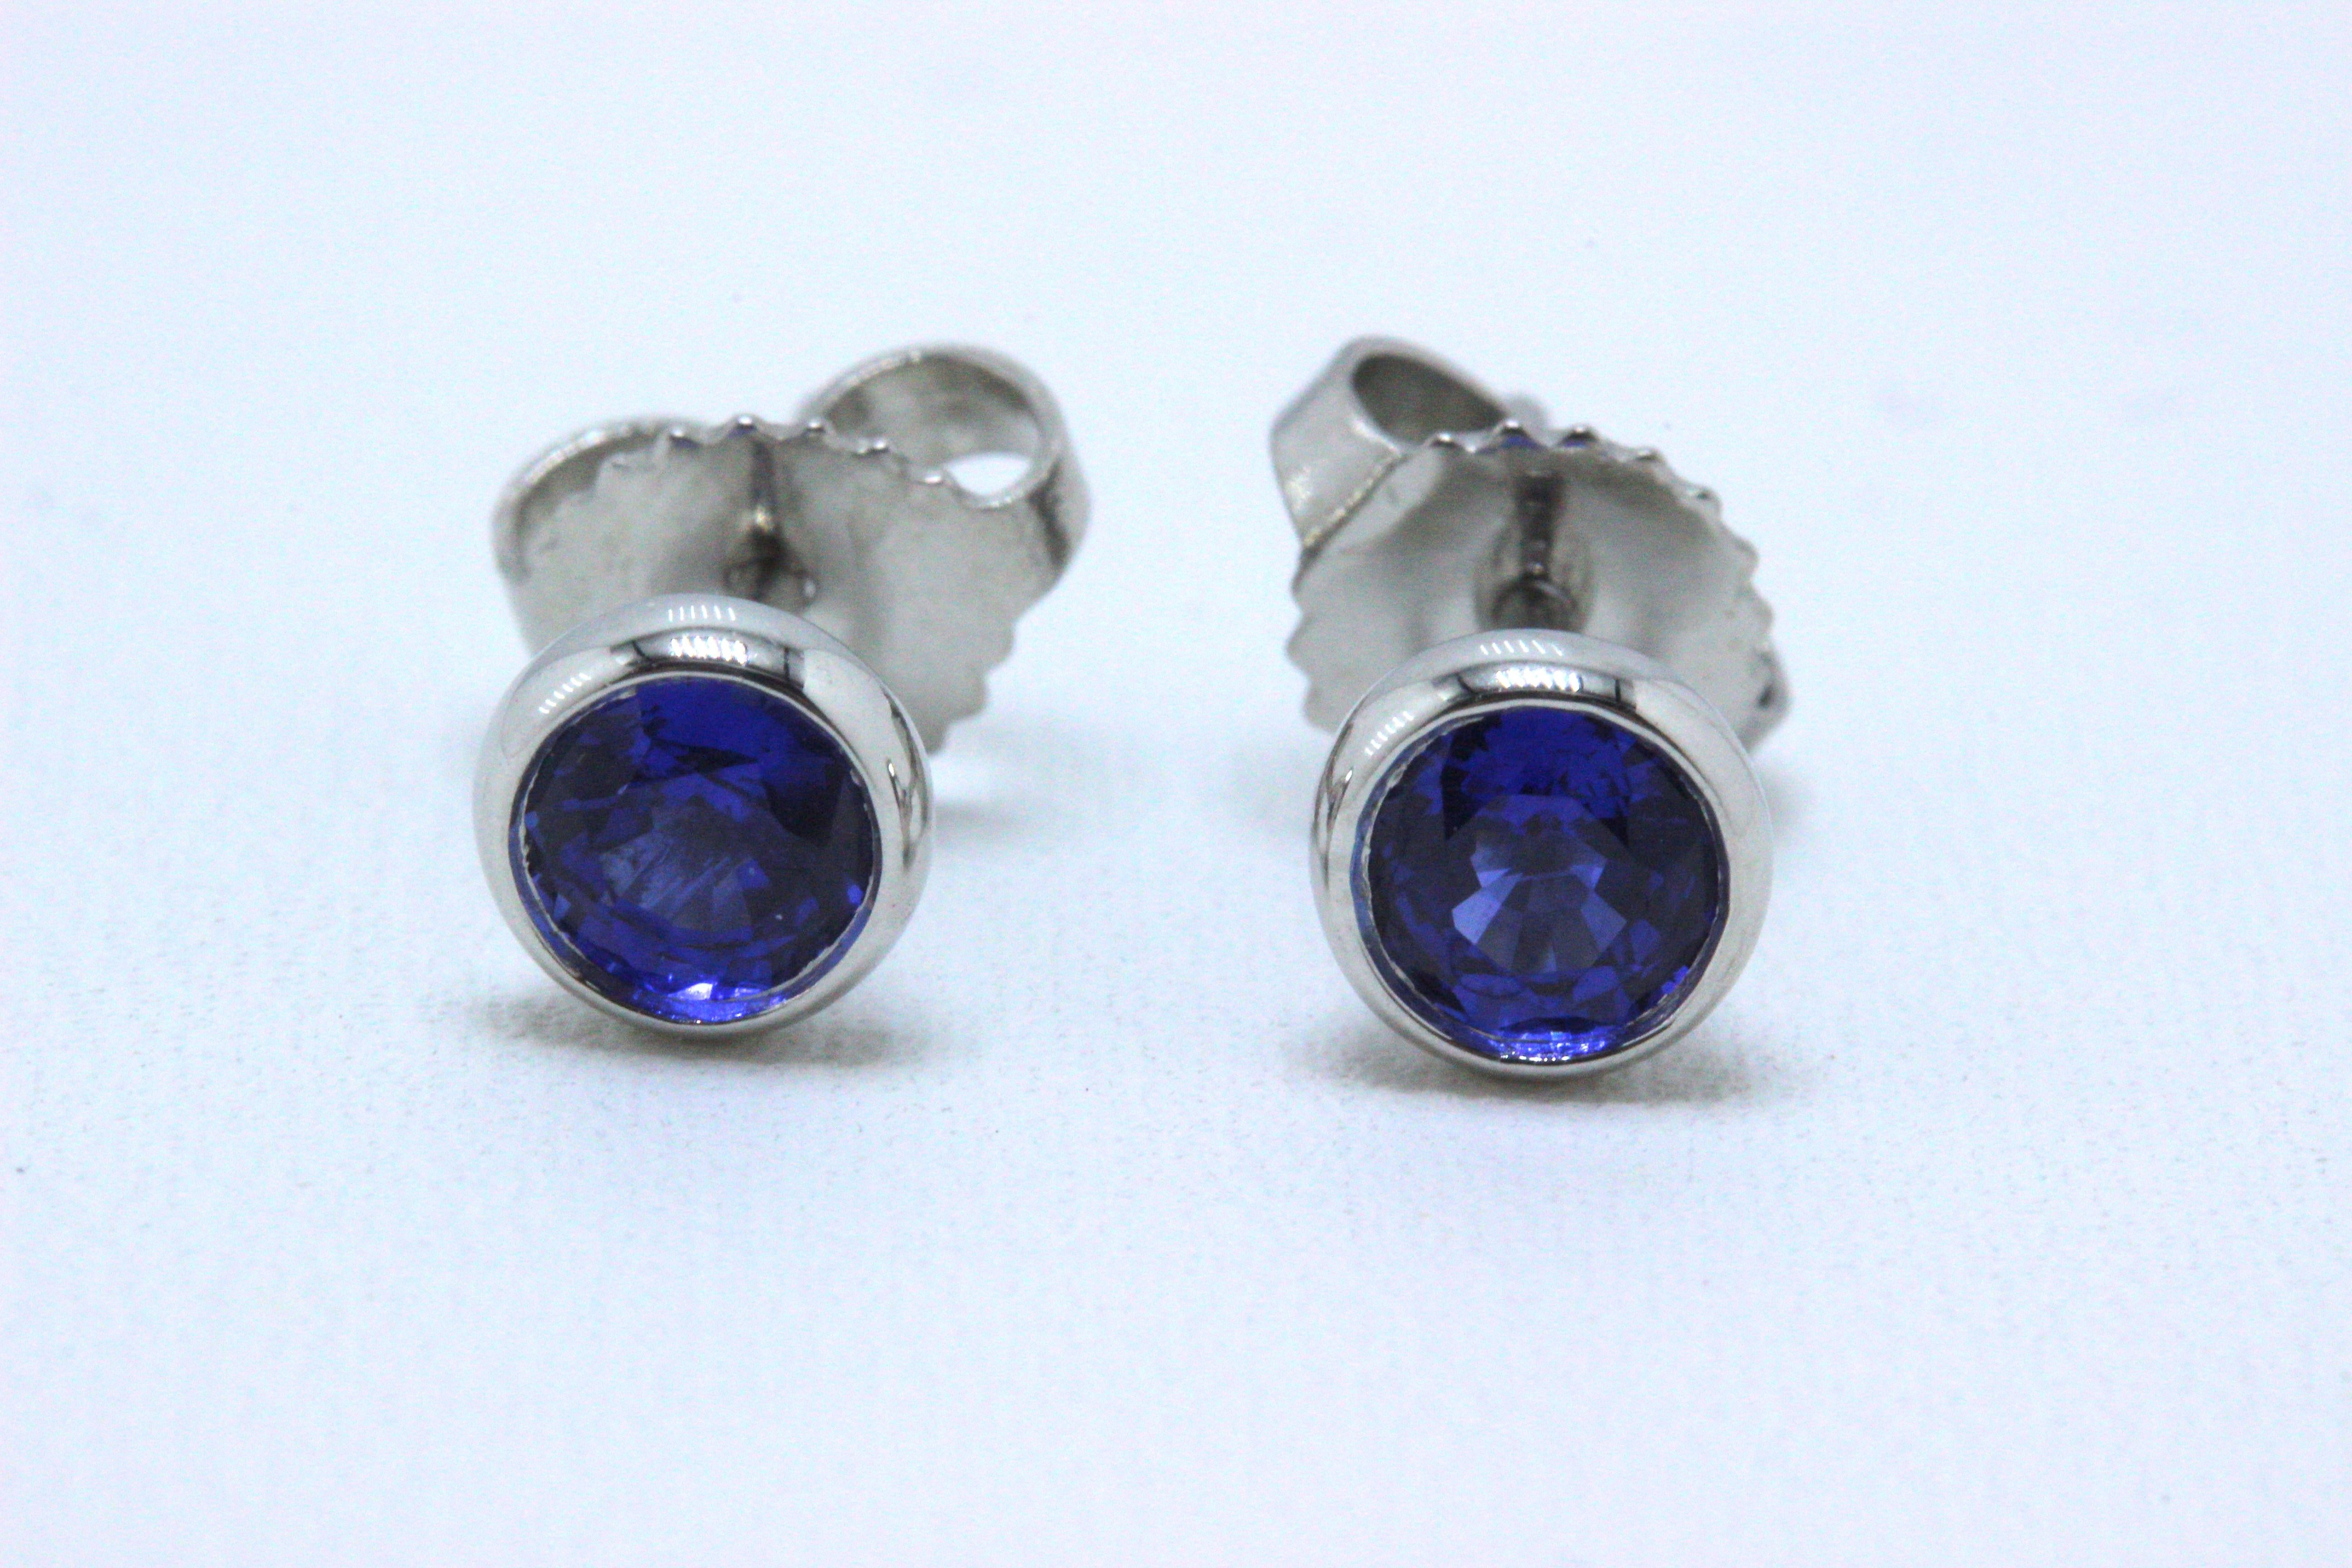 Tiffany & Co.
Style:  Elsa Peretti Sapphire Color by the Yard
Metal:  Platinum PT950
Width:  5 mm
Total Carat Weight:  0.70 TCW
Sapphire Shape:  Round
Color:  Blue
Hallmark:  ©ELSAPERETTIT&CO.PT950 on earrings & ©T&CO.PT950 on backs
Includes:  T&C